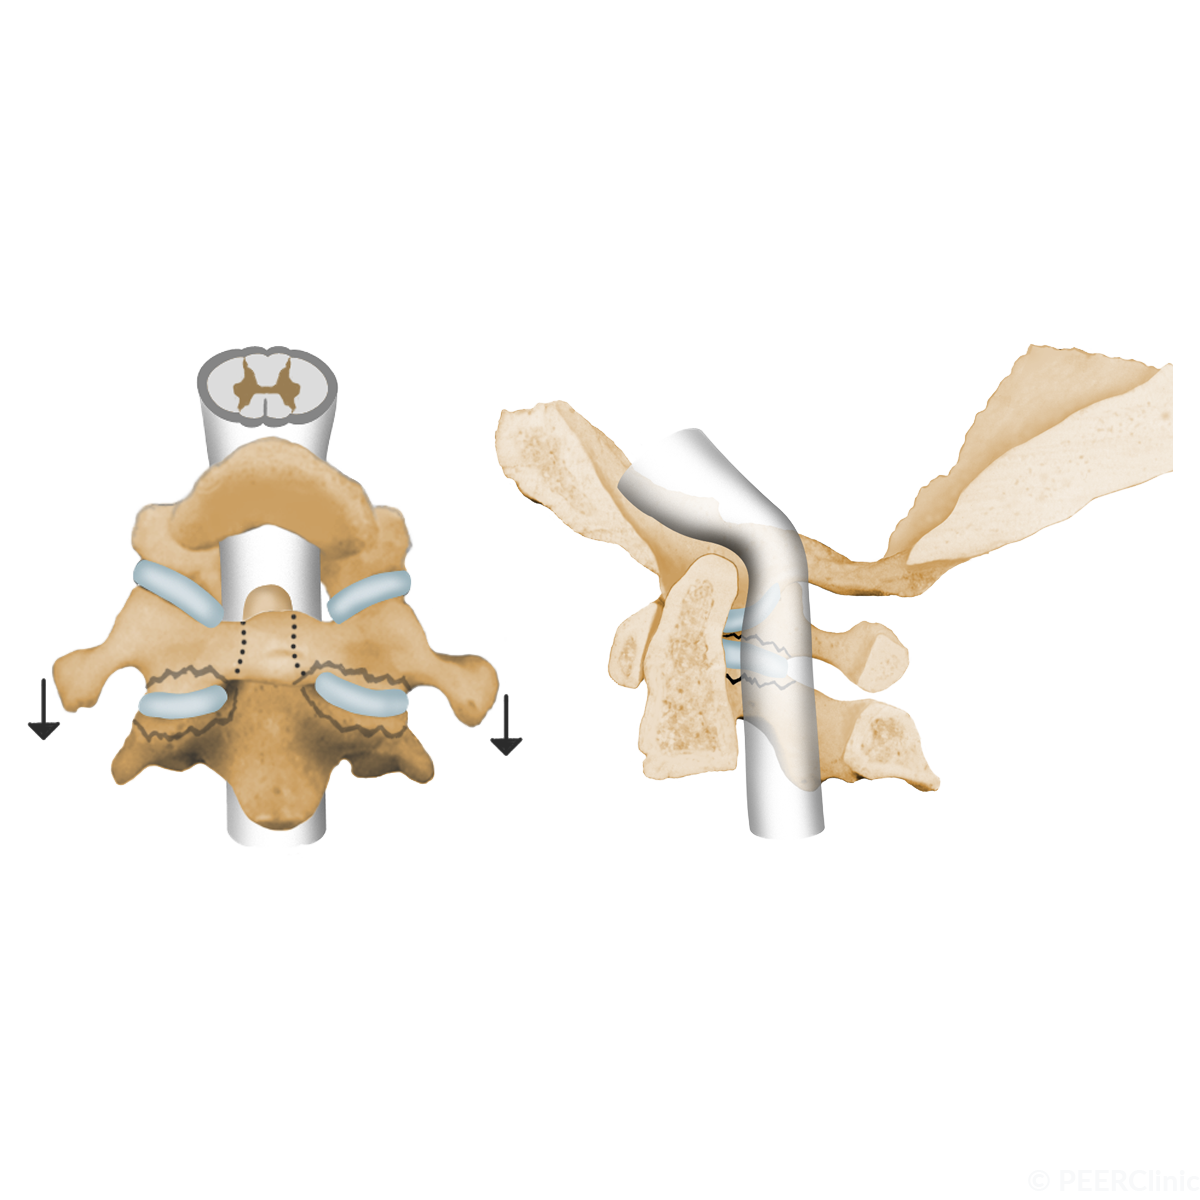 Basilar invagination refers to cephalad migration of the c-spine in relation to the foramen magnum